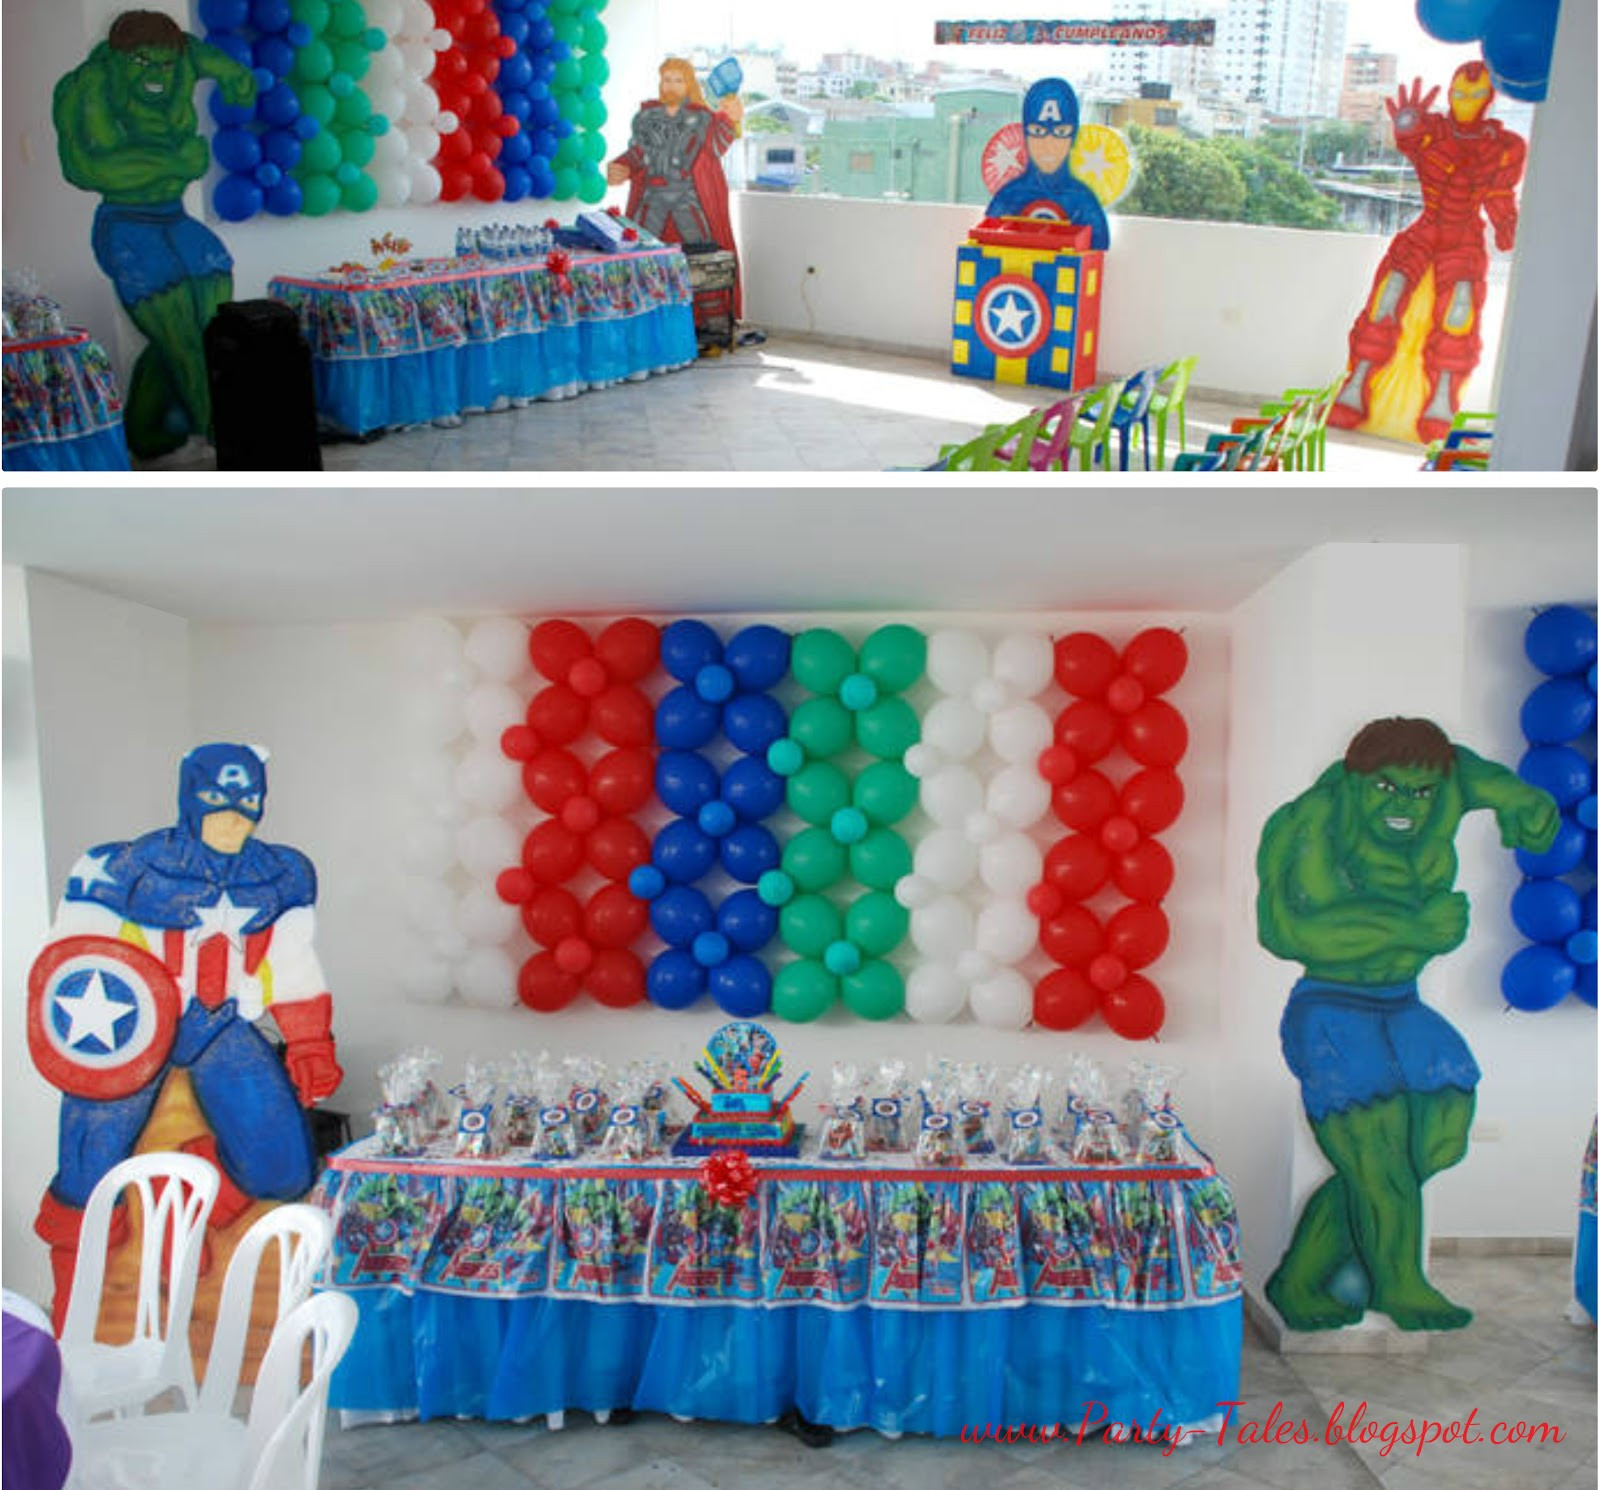 Avengers Themed Birthday Party Ideas
 Party Tales Birthday Party The Avengers